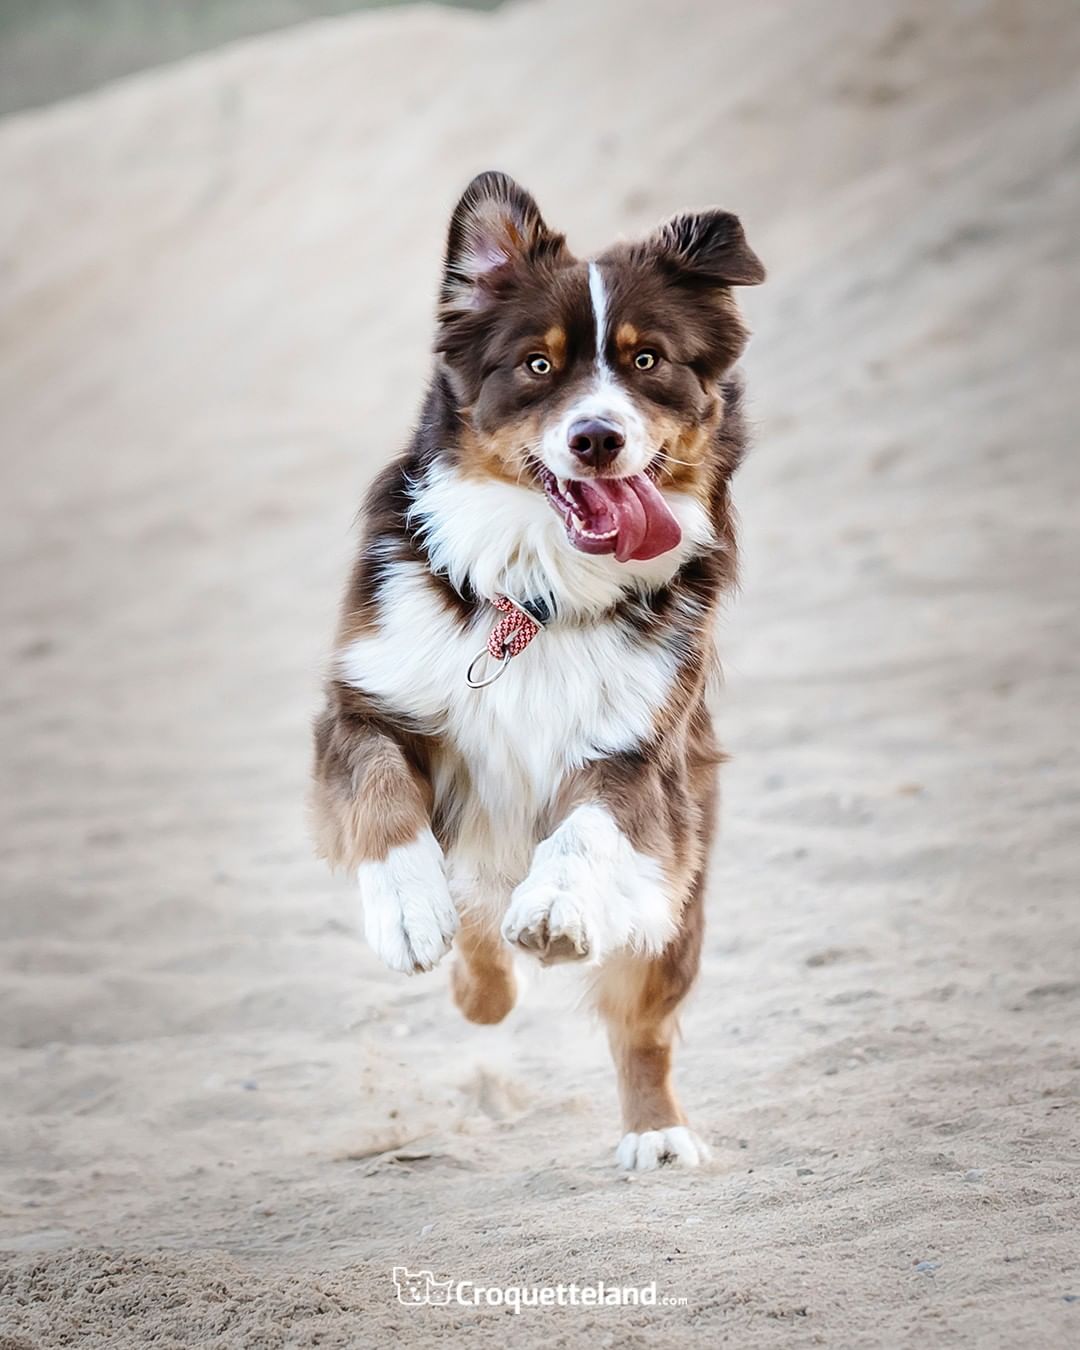 An Australian Shepherd running in the sand with its tongue out